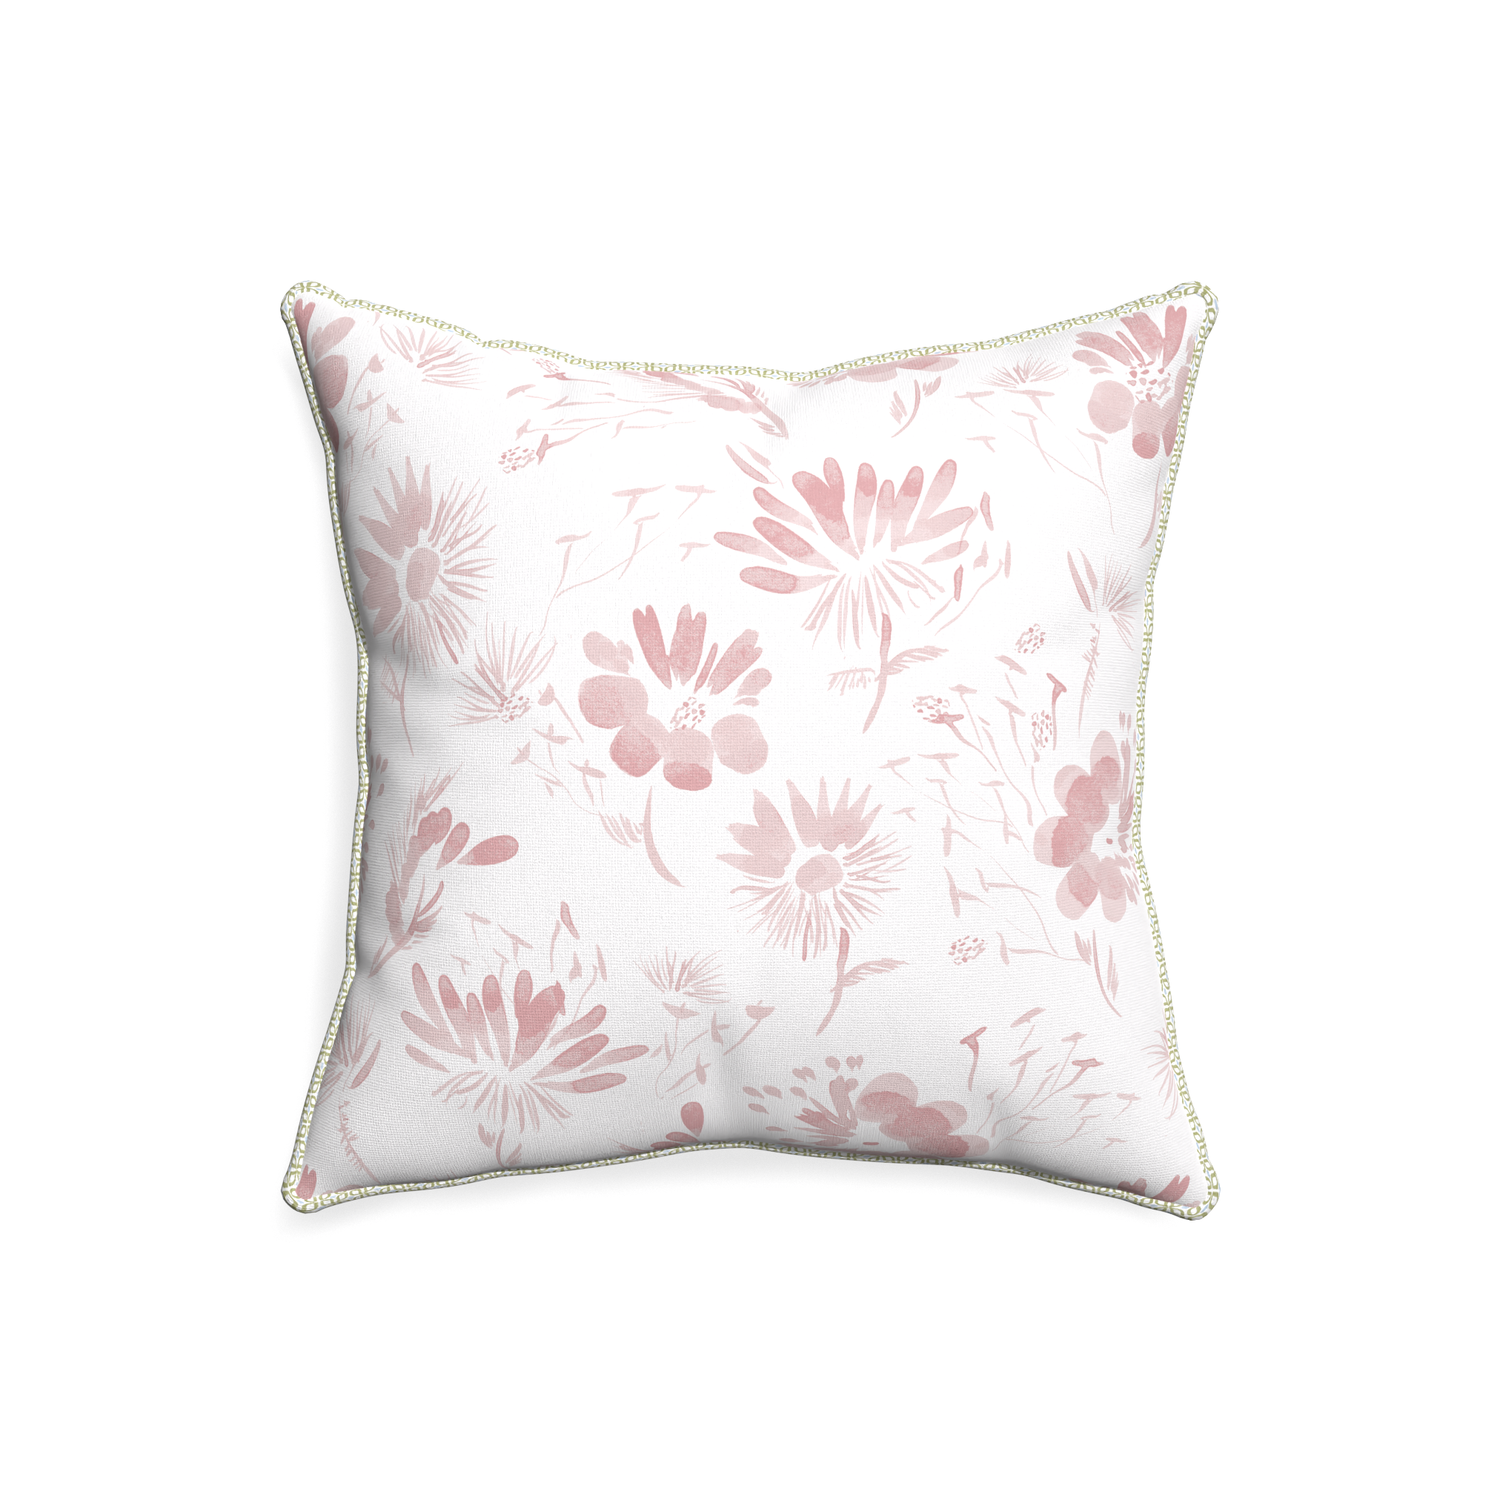 20-square blake custom pink floralpillow with l piping on white background